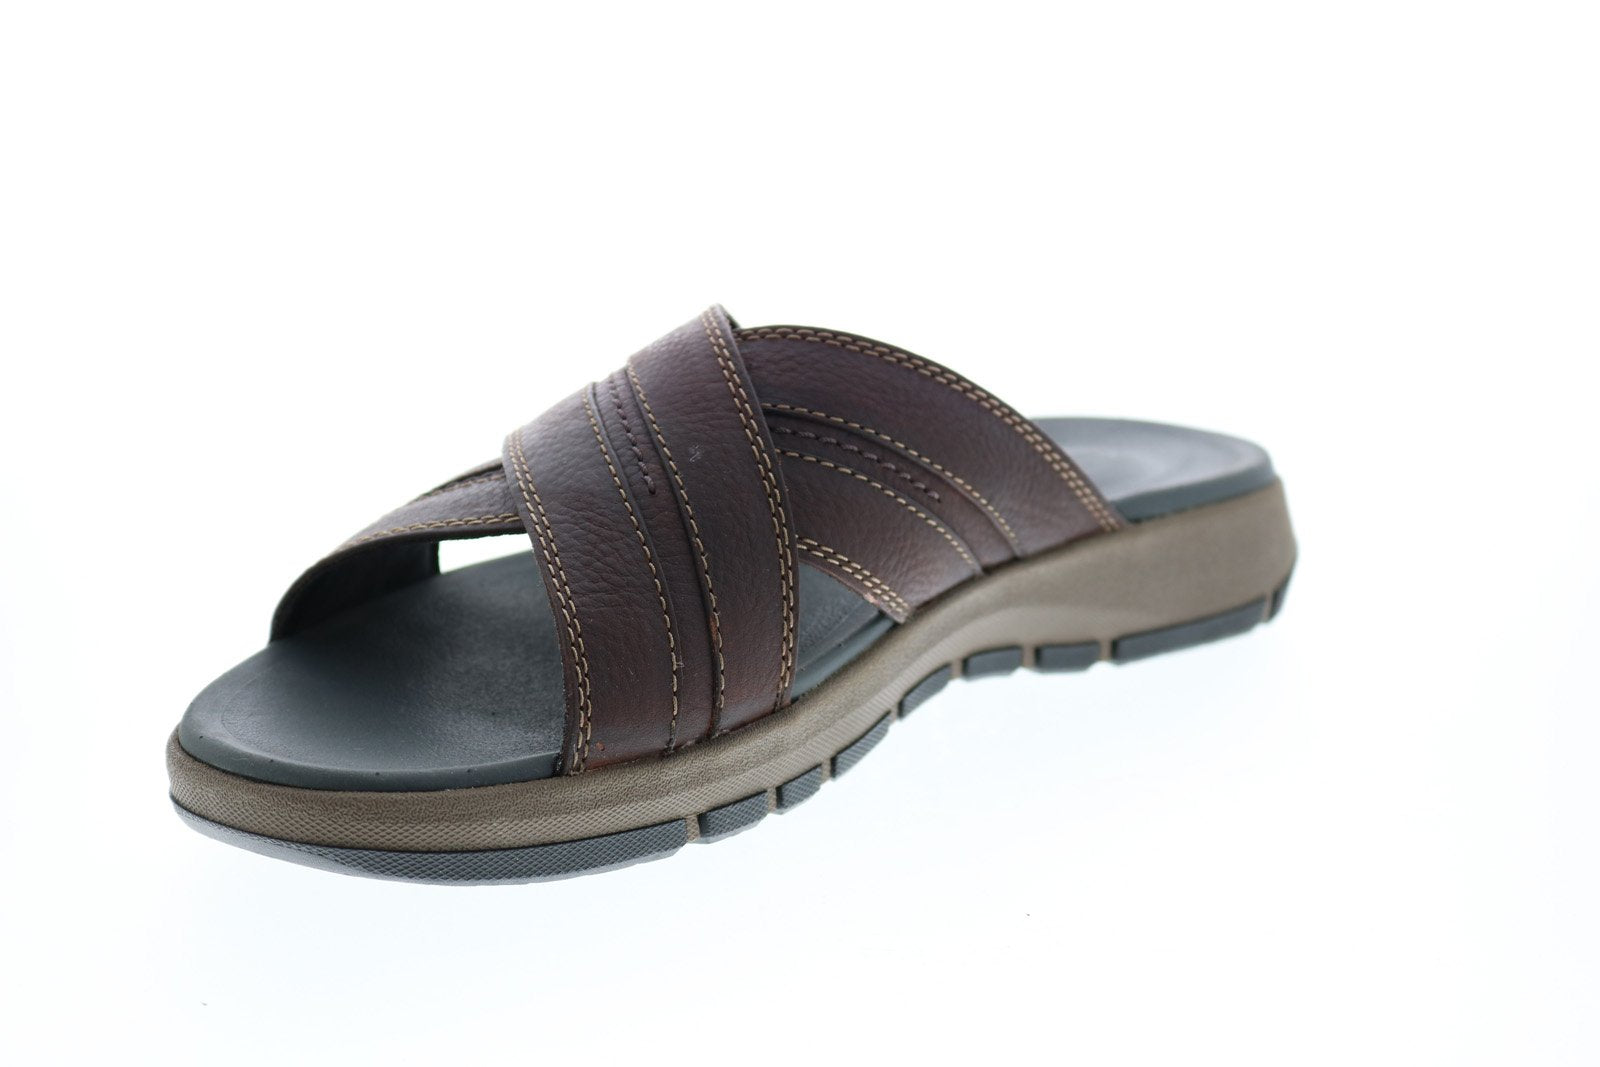 clarks brixby cross sandals